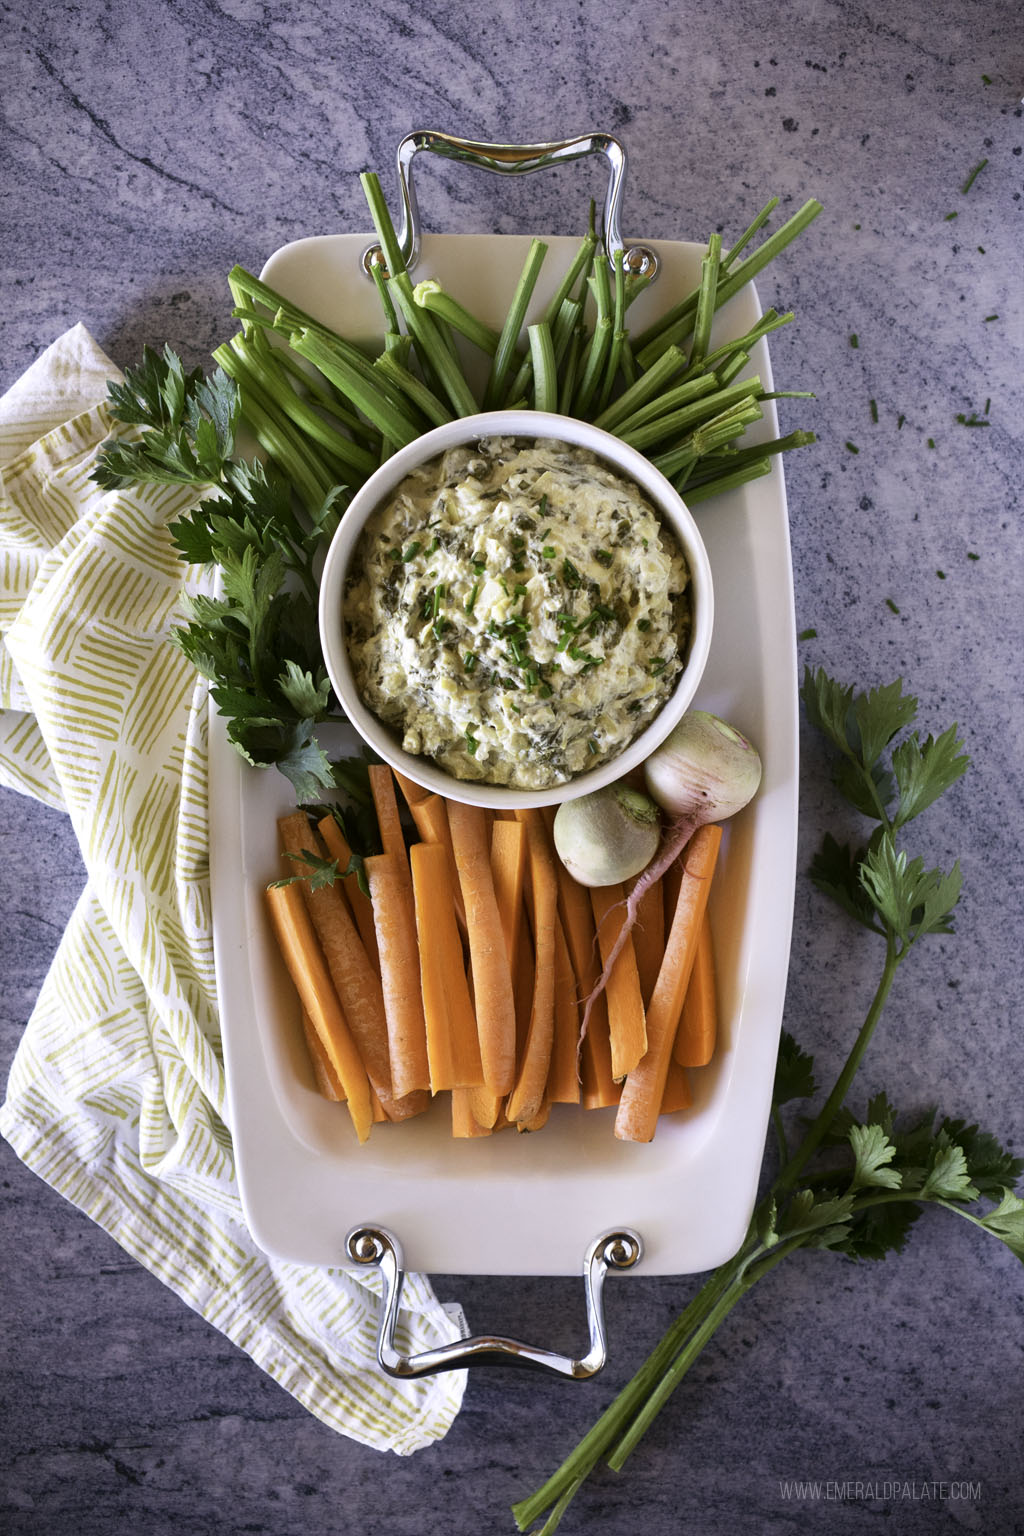 Platter of carrot and celery with a celery root dip, a healthy take on an artichoke spinach dip